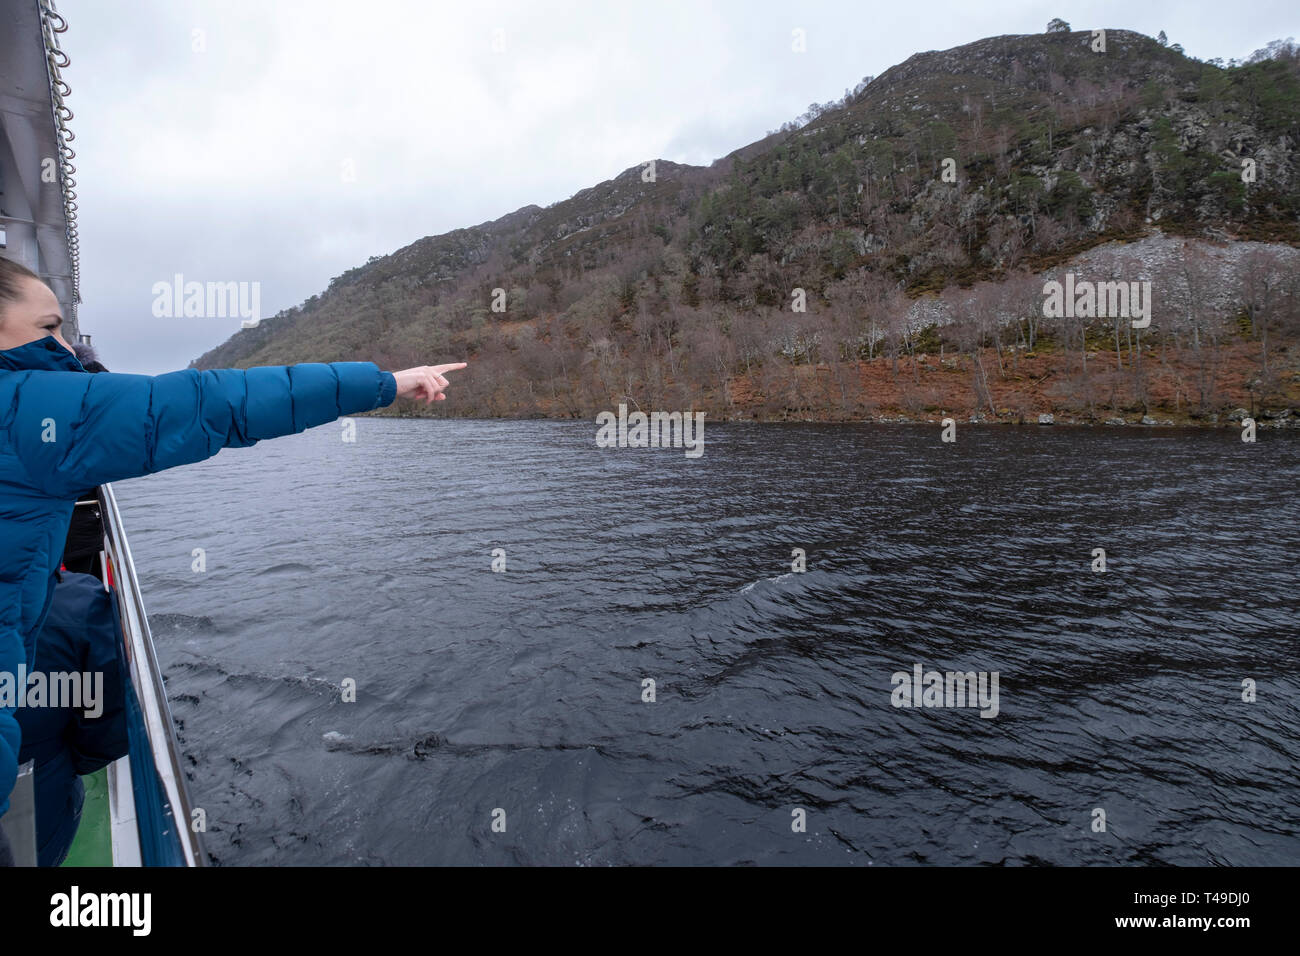 Tourist searching for monster Nessie during a cruise boat ride on Loch Ness, Scottish Highlands, Scotland, UK, Europe Stock Photo